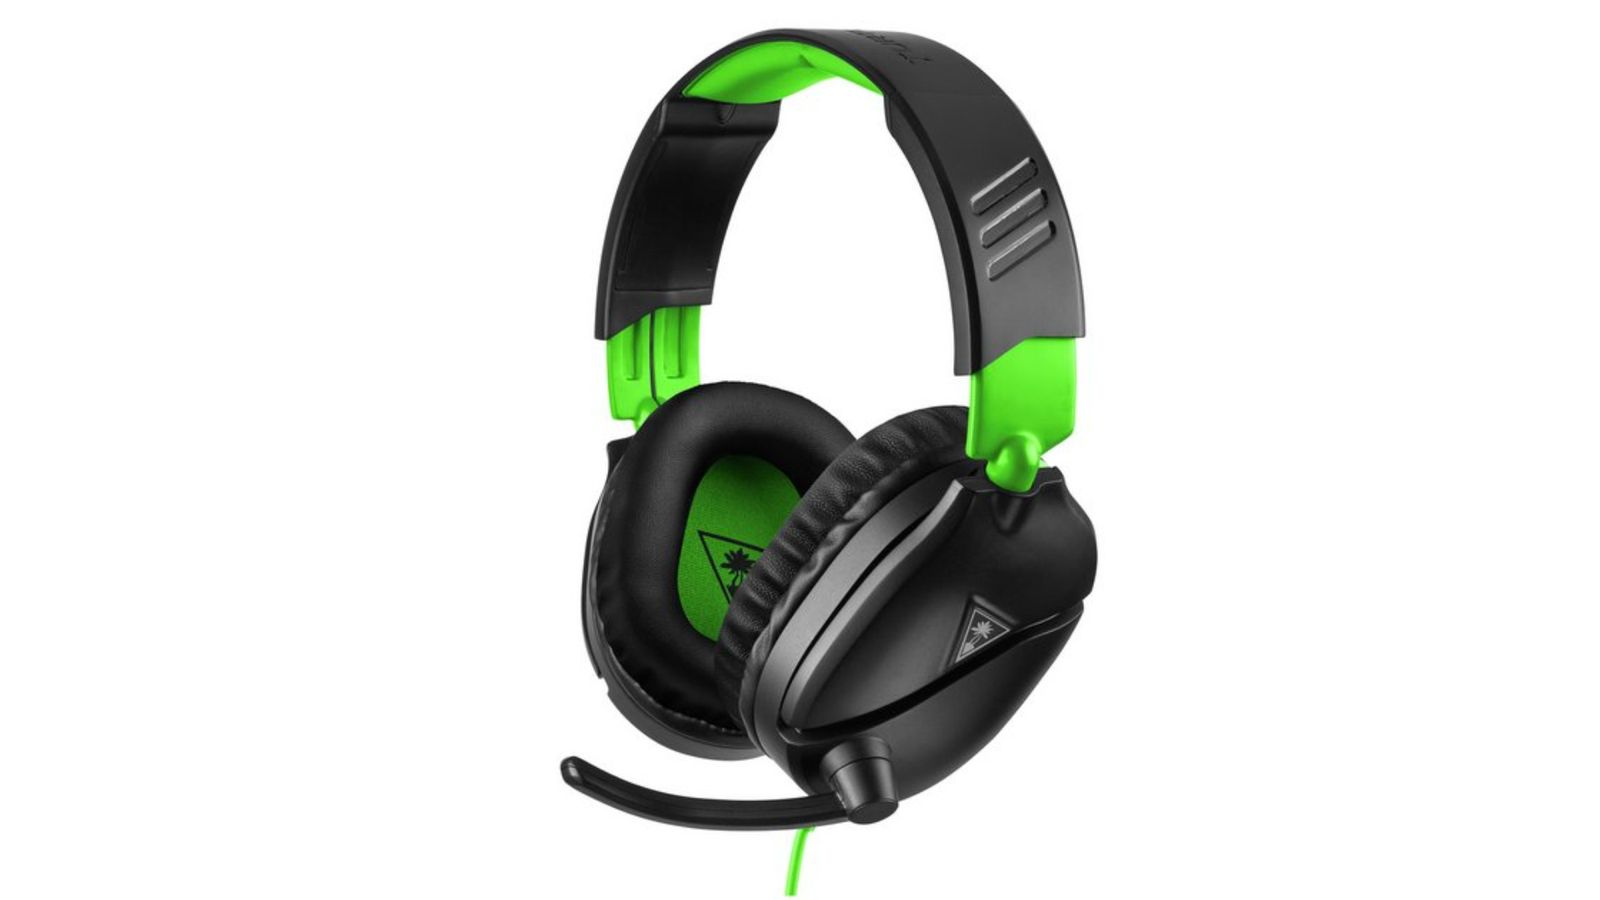 Turtle Beach Recon 70X product image of a black and green over-ear headset with a mic.